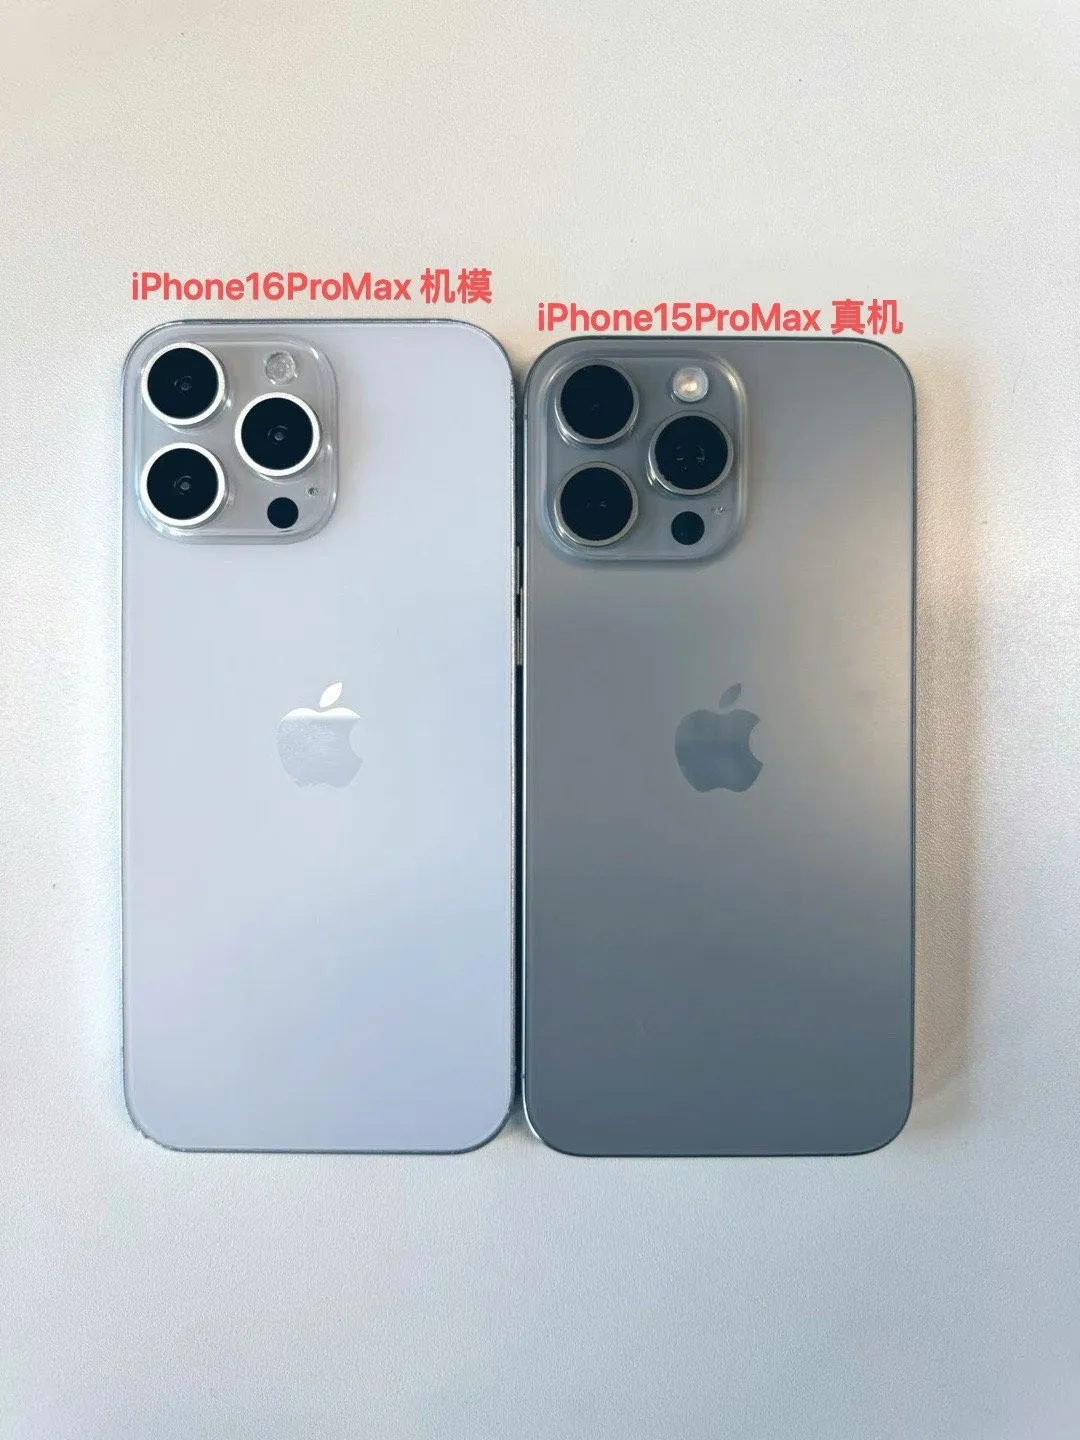 iPhone 16 Pro Max rumoured to have a 6.9-inch display, 0.2mm larger than its predecessor